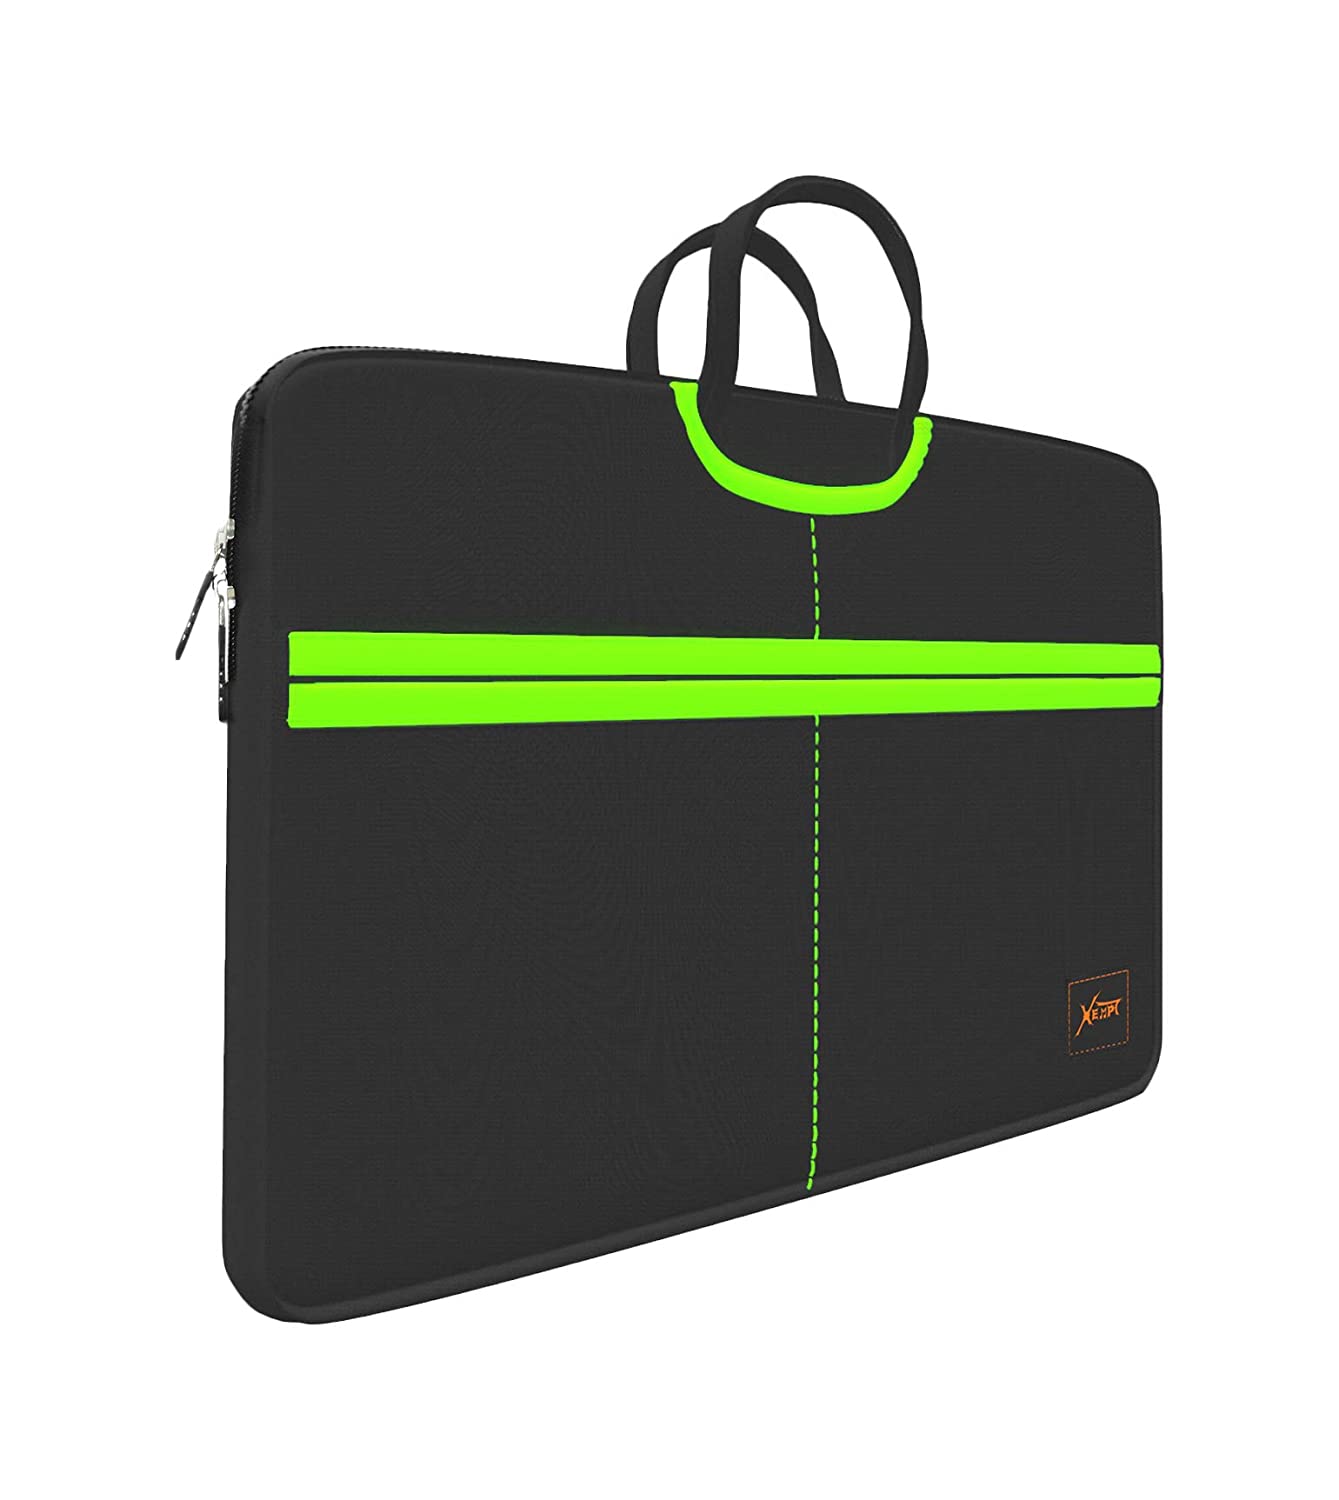 Xempt Laptop Sleeve For Laptops - 15.6 Inches